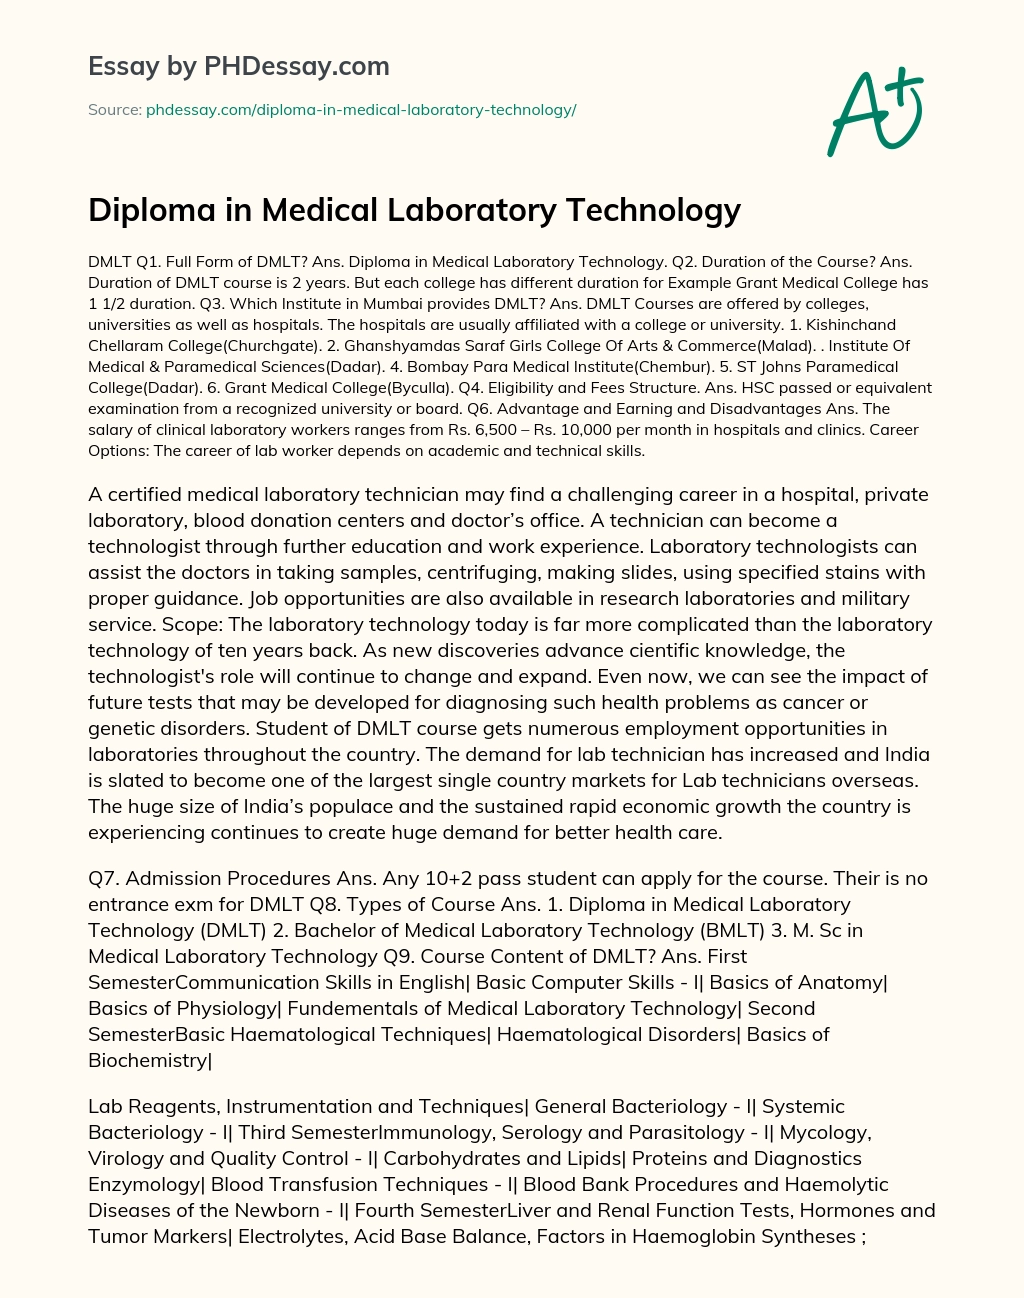 Diploma in Medical Laboratory Technology essay